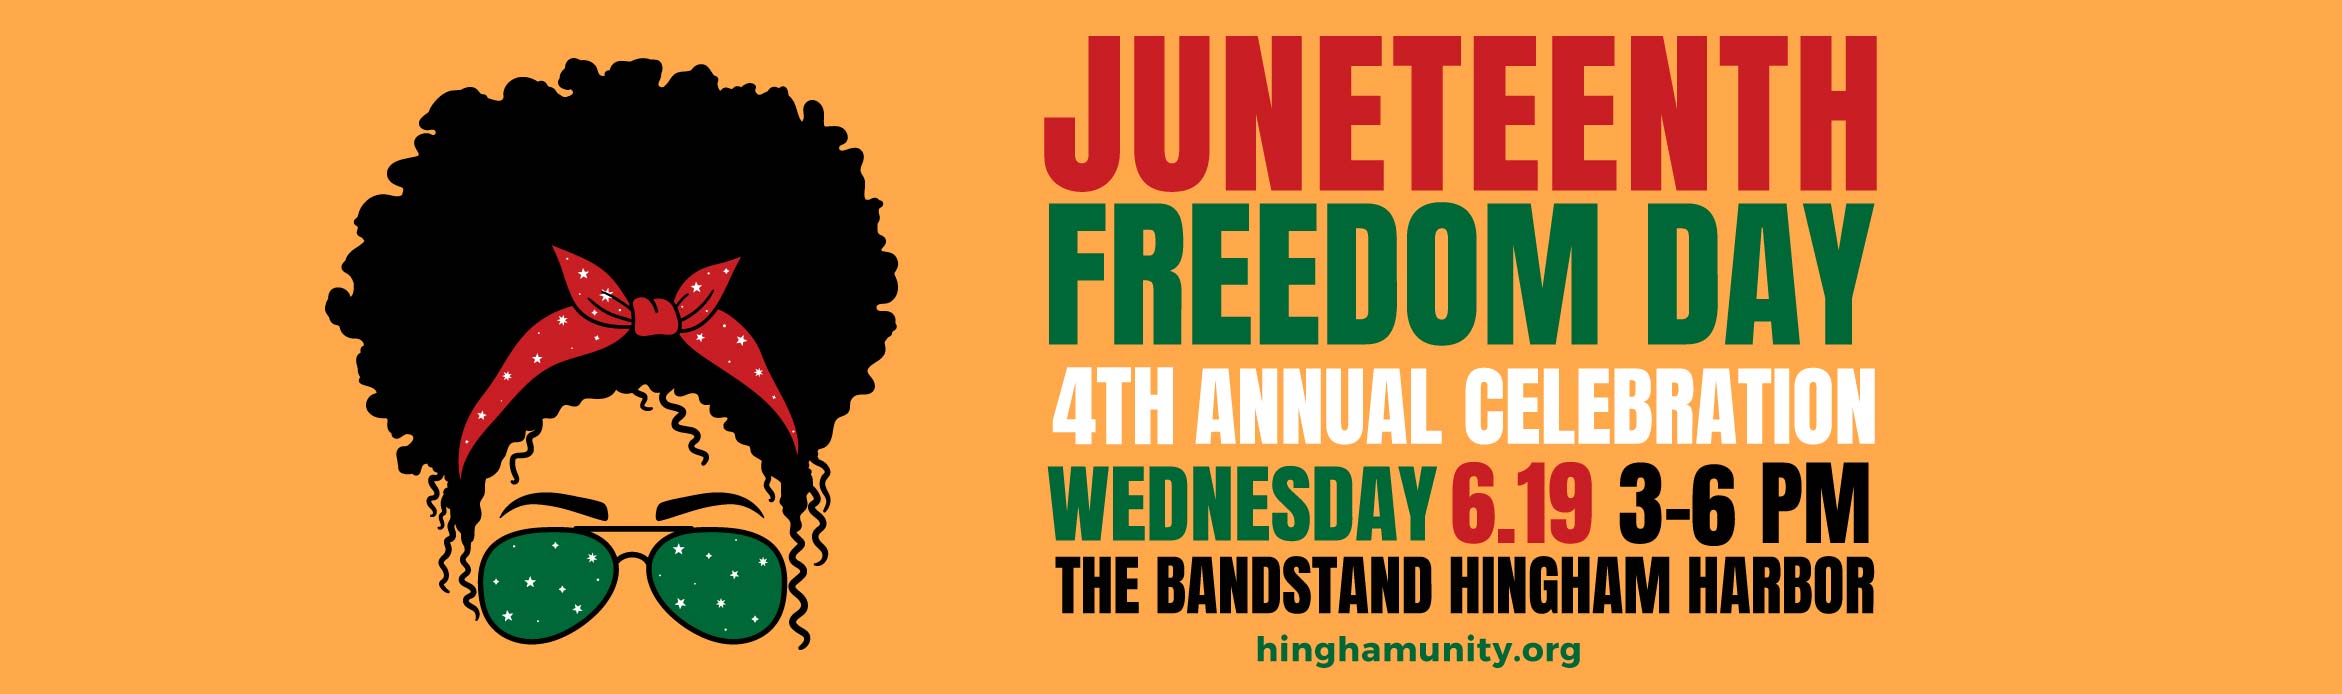 juneteenth banner with date and time june 19 3-6 pm at hingham harbor bandstand